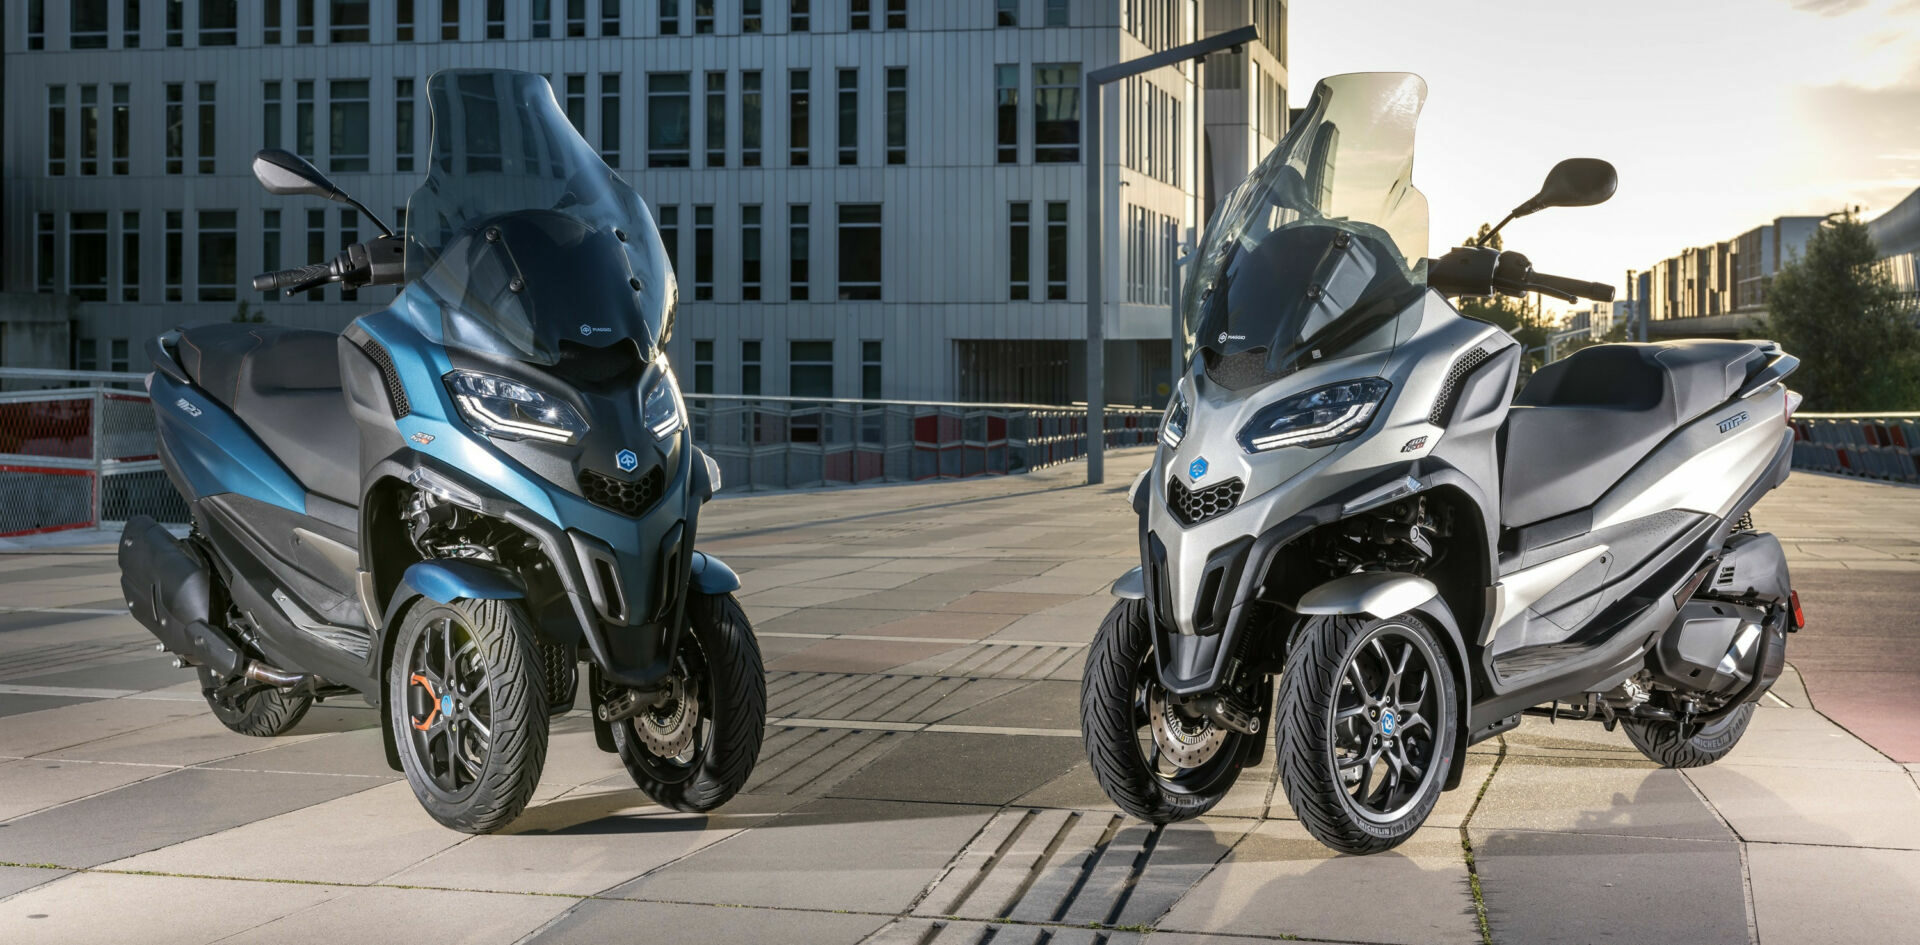 Piaggio Unveils All-New Scooters - Roadracing World | Motorcycle Riding, & Tech News